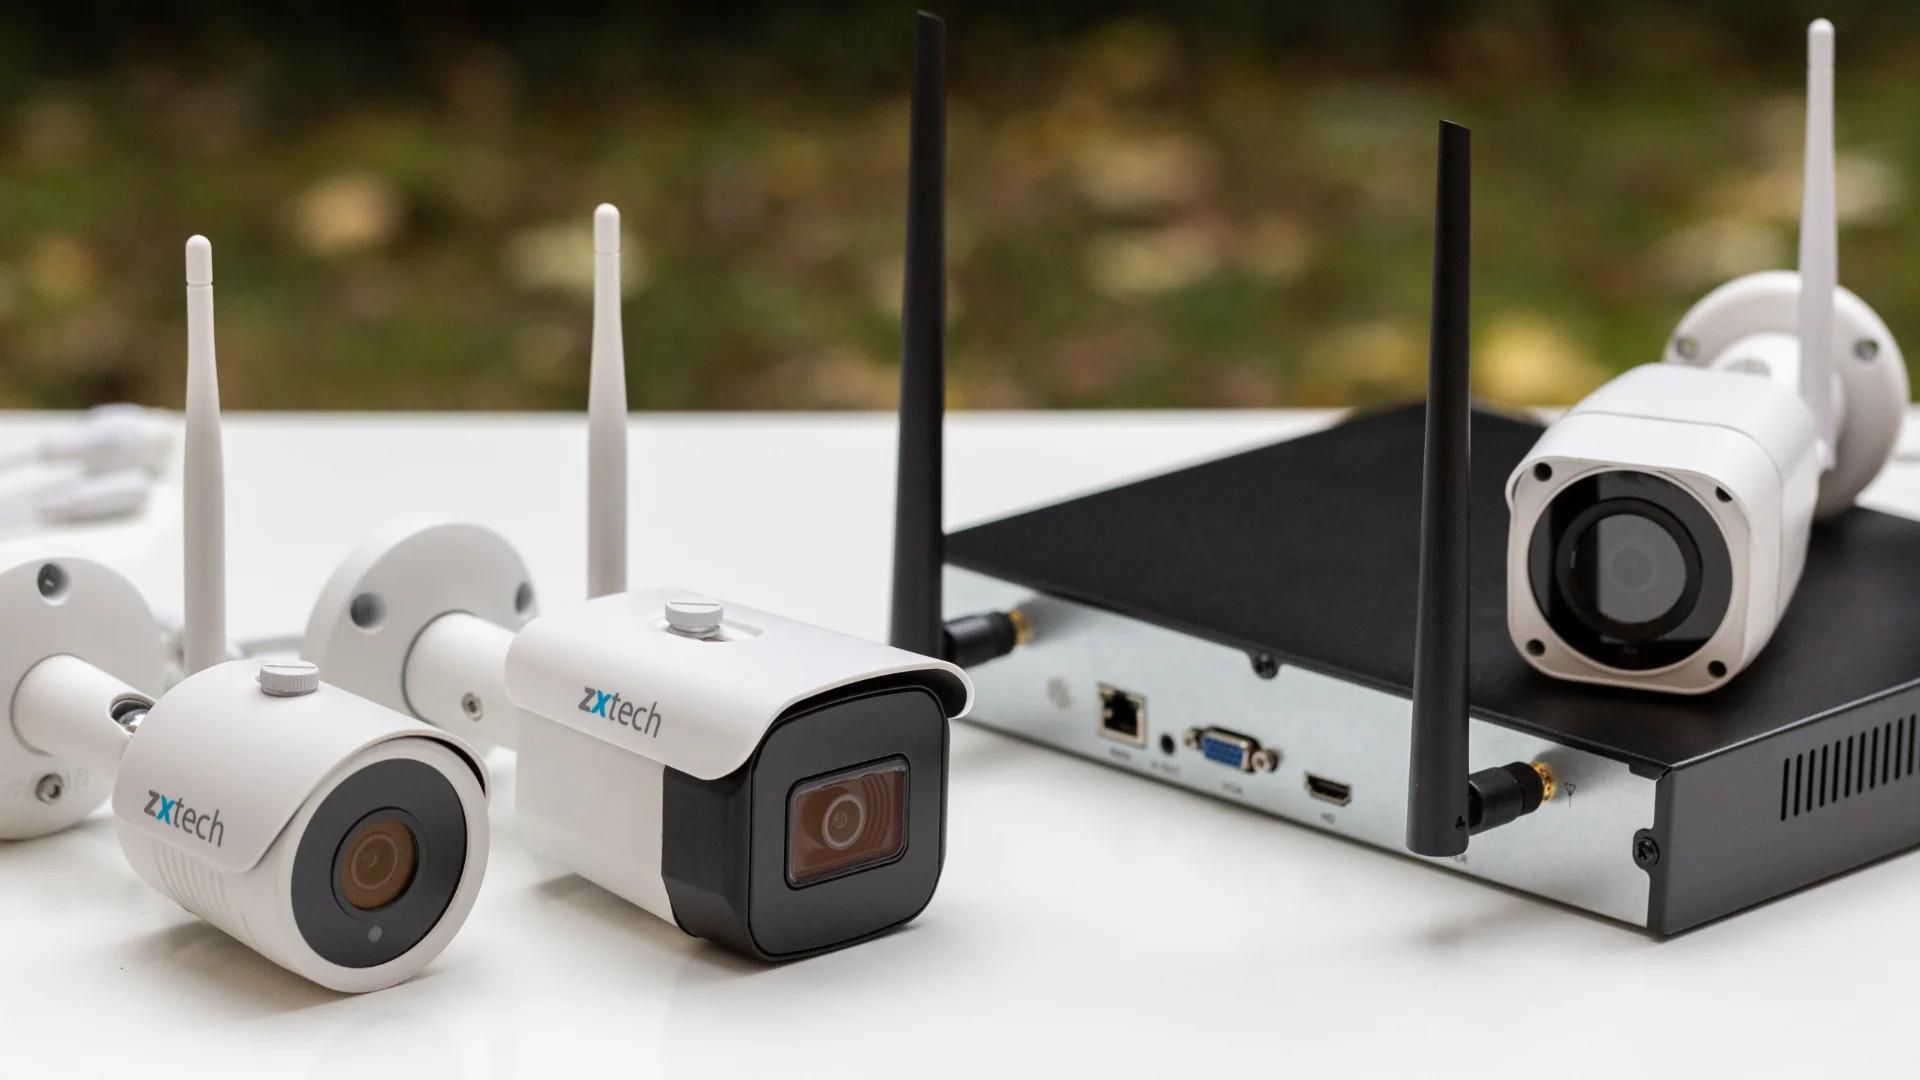 How To Get Wifi For Security Cameras